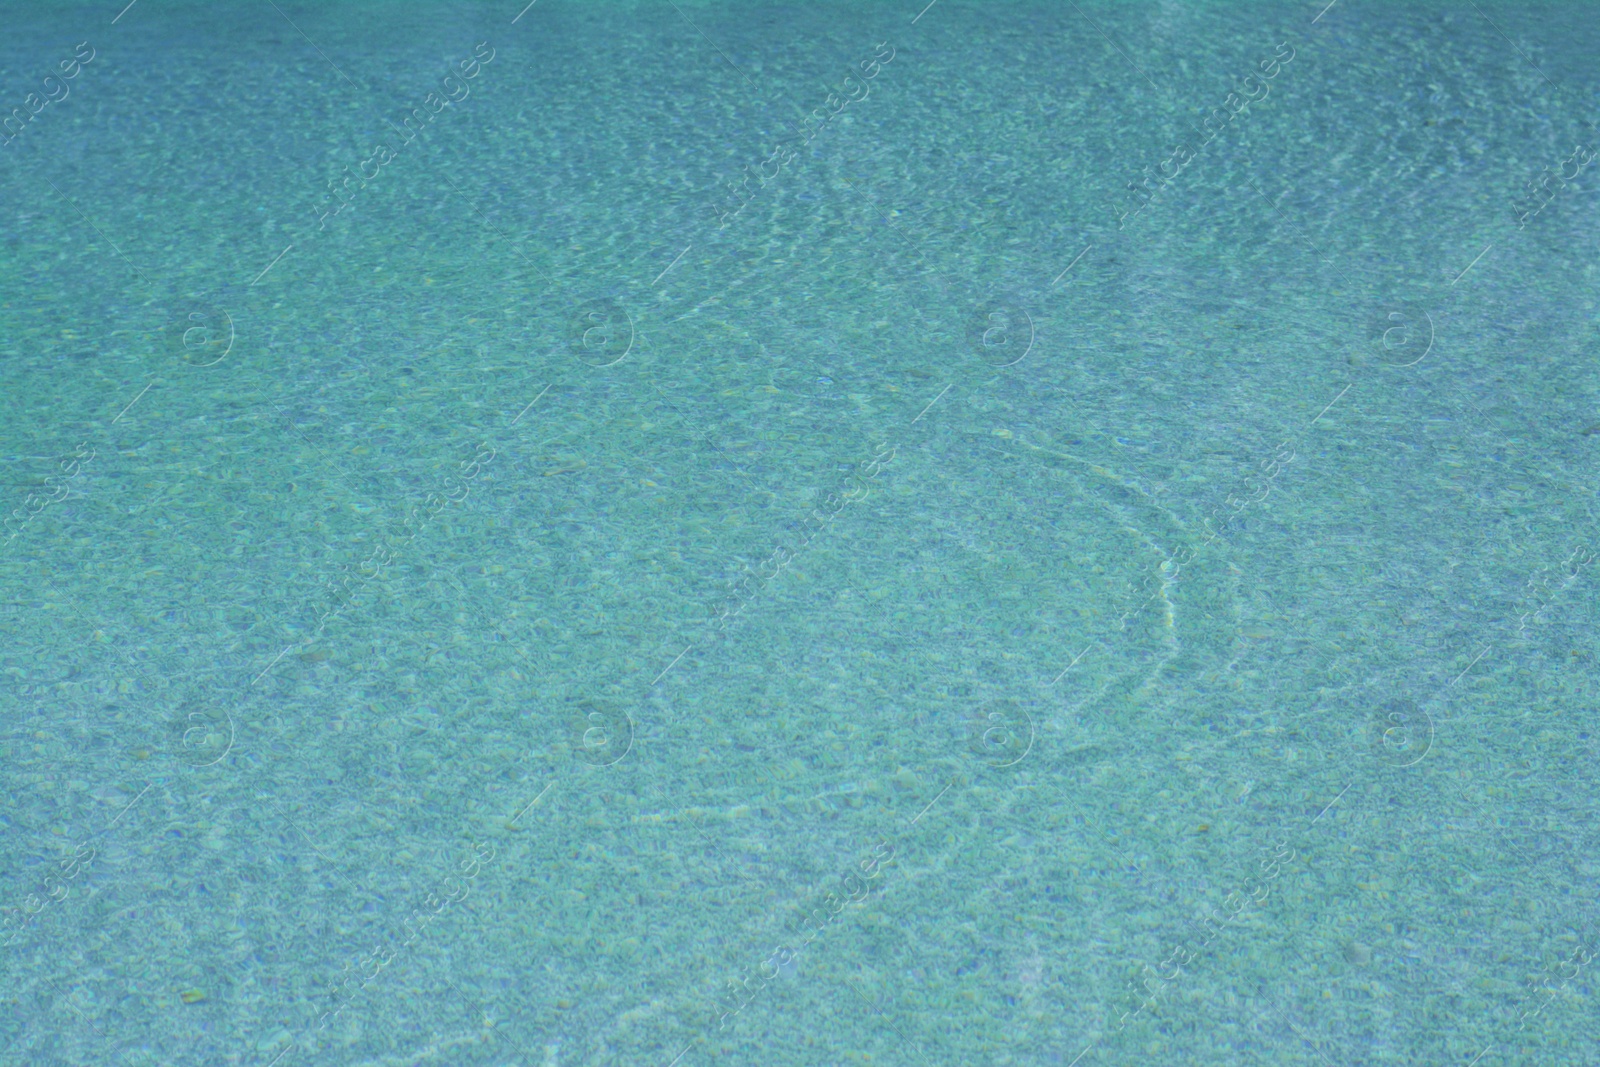 Photo of Calm clear water in swimming pool outdoors